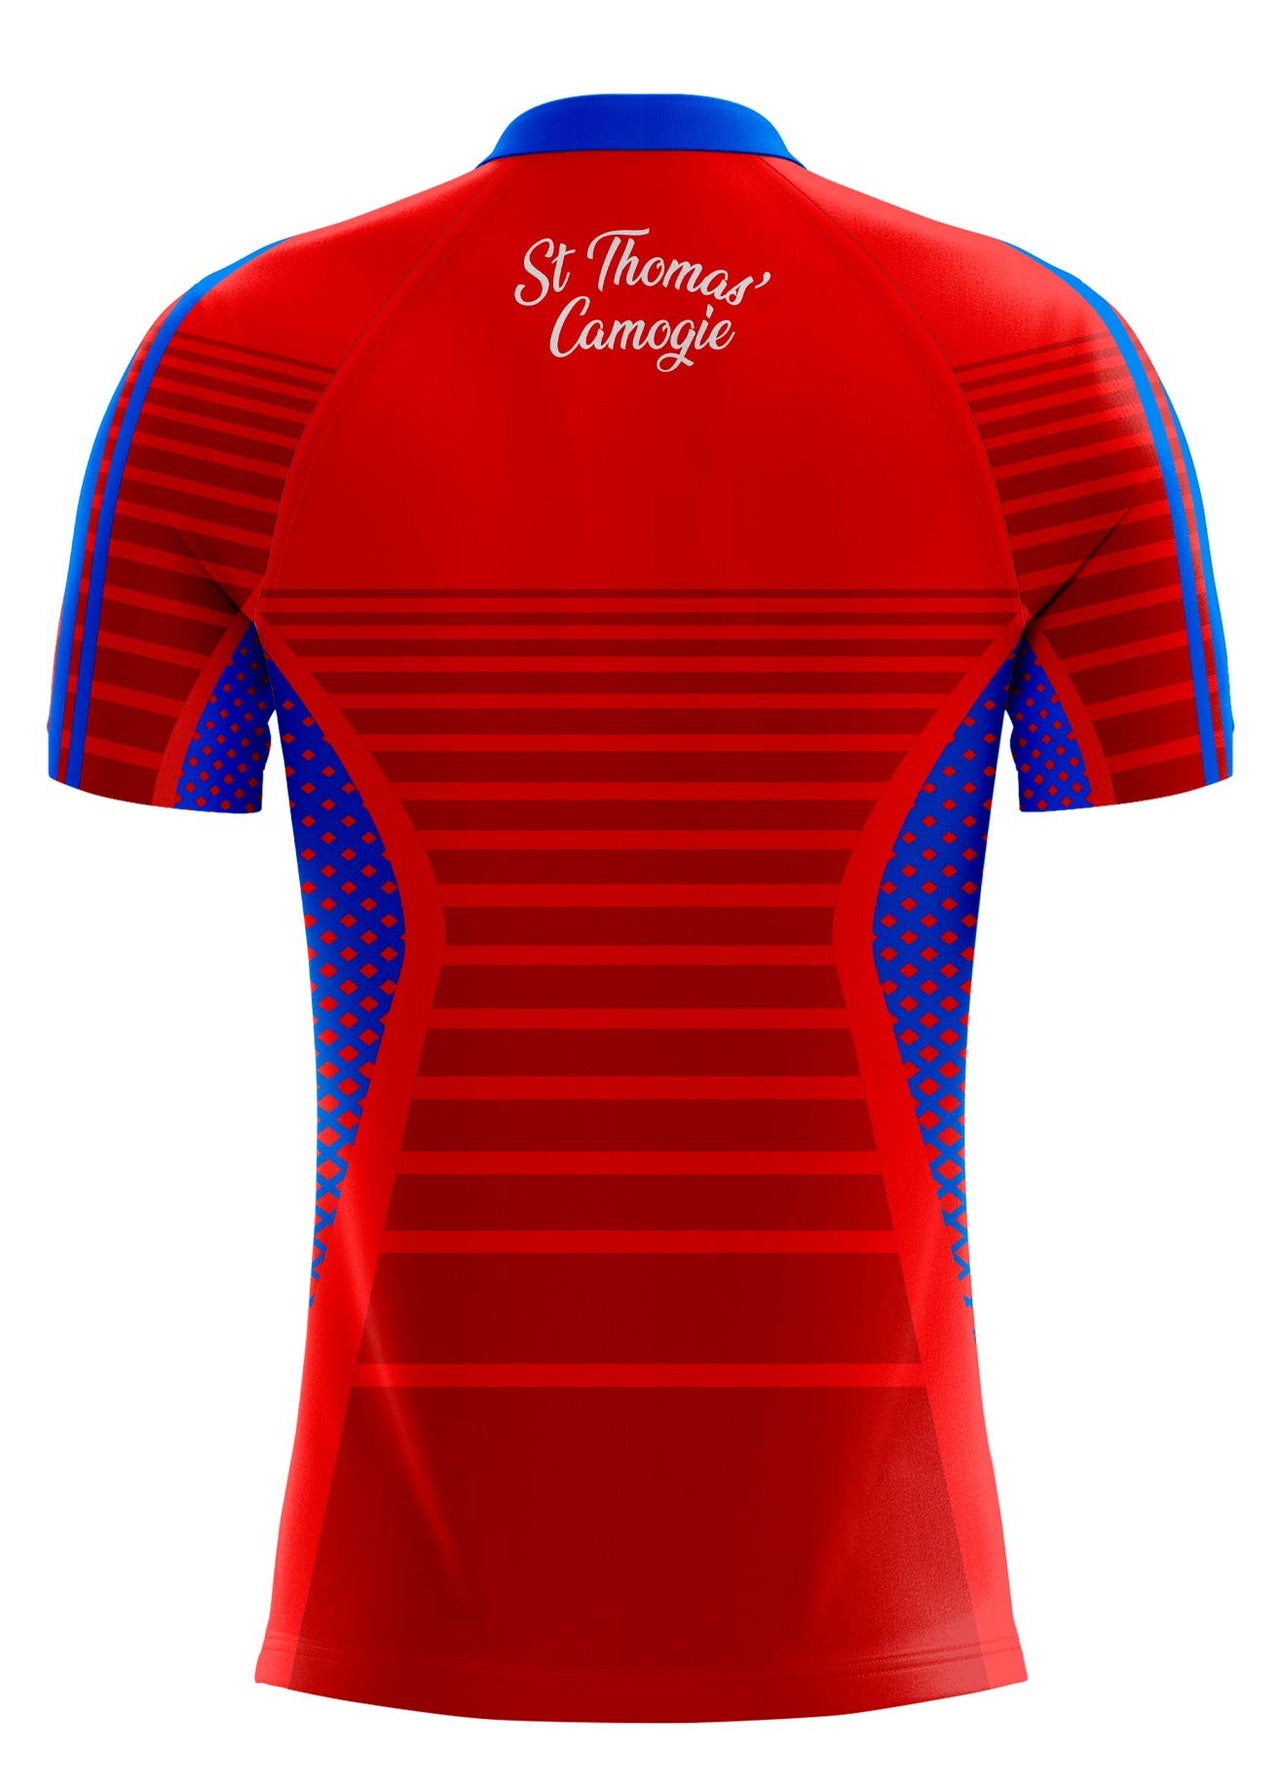 St Thomas' Camogie Home Jersey Kids